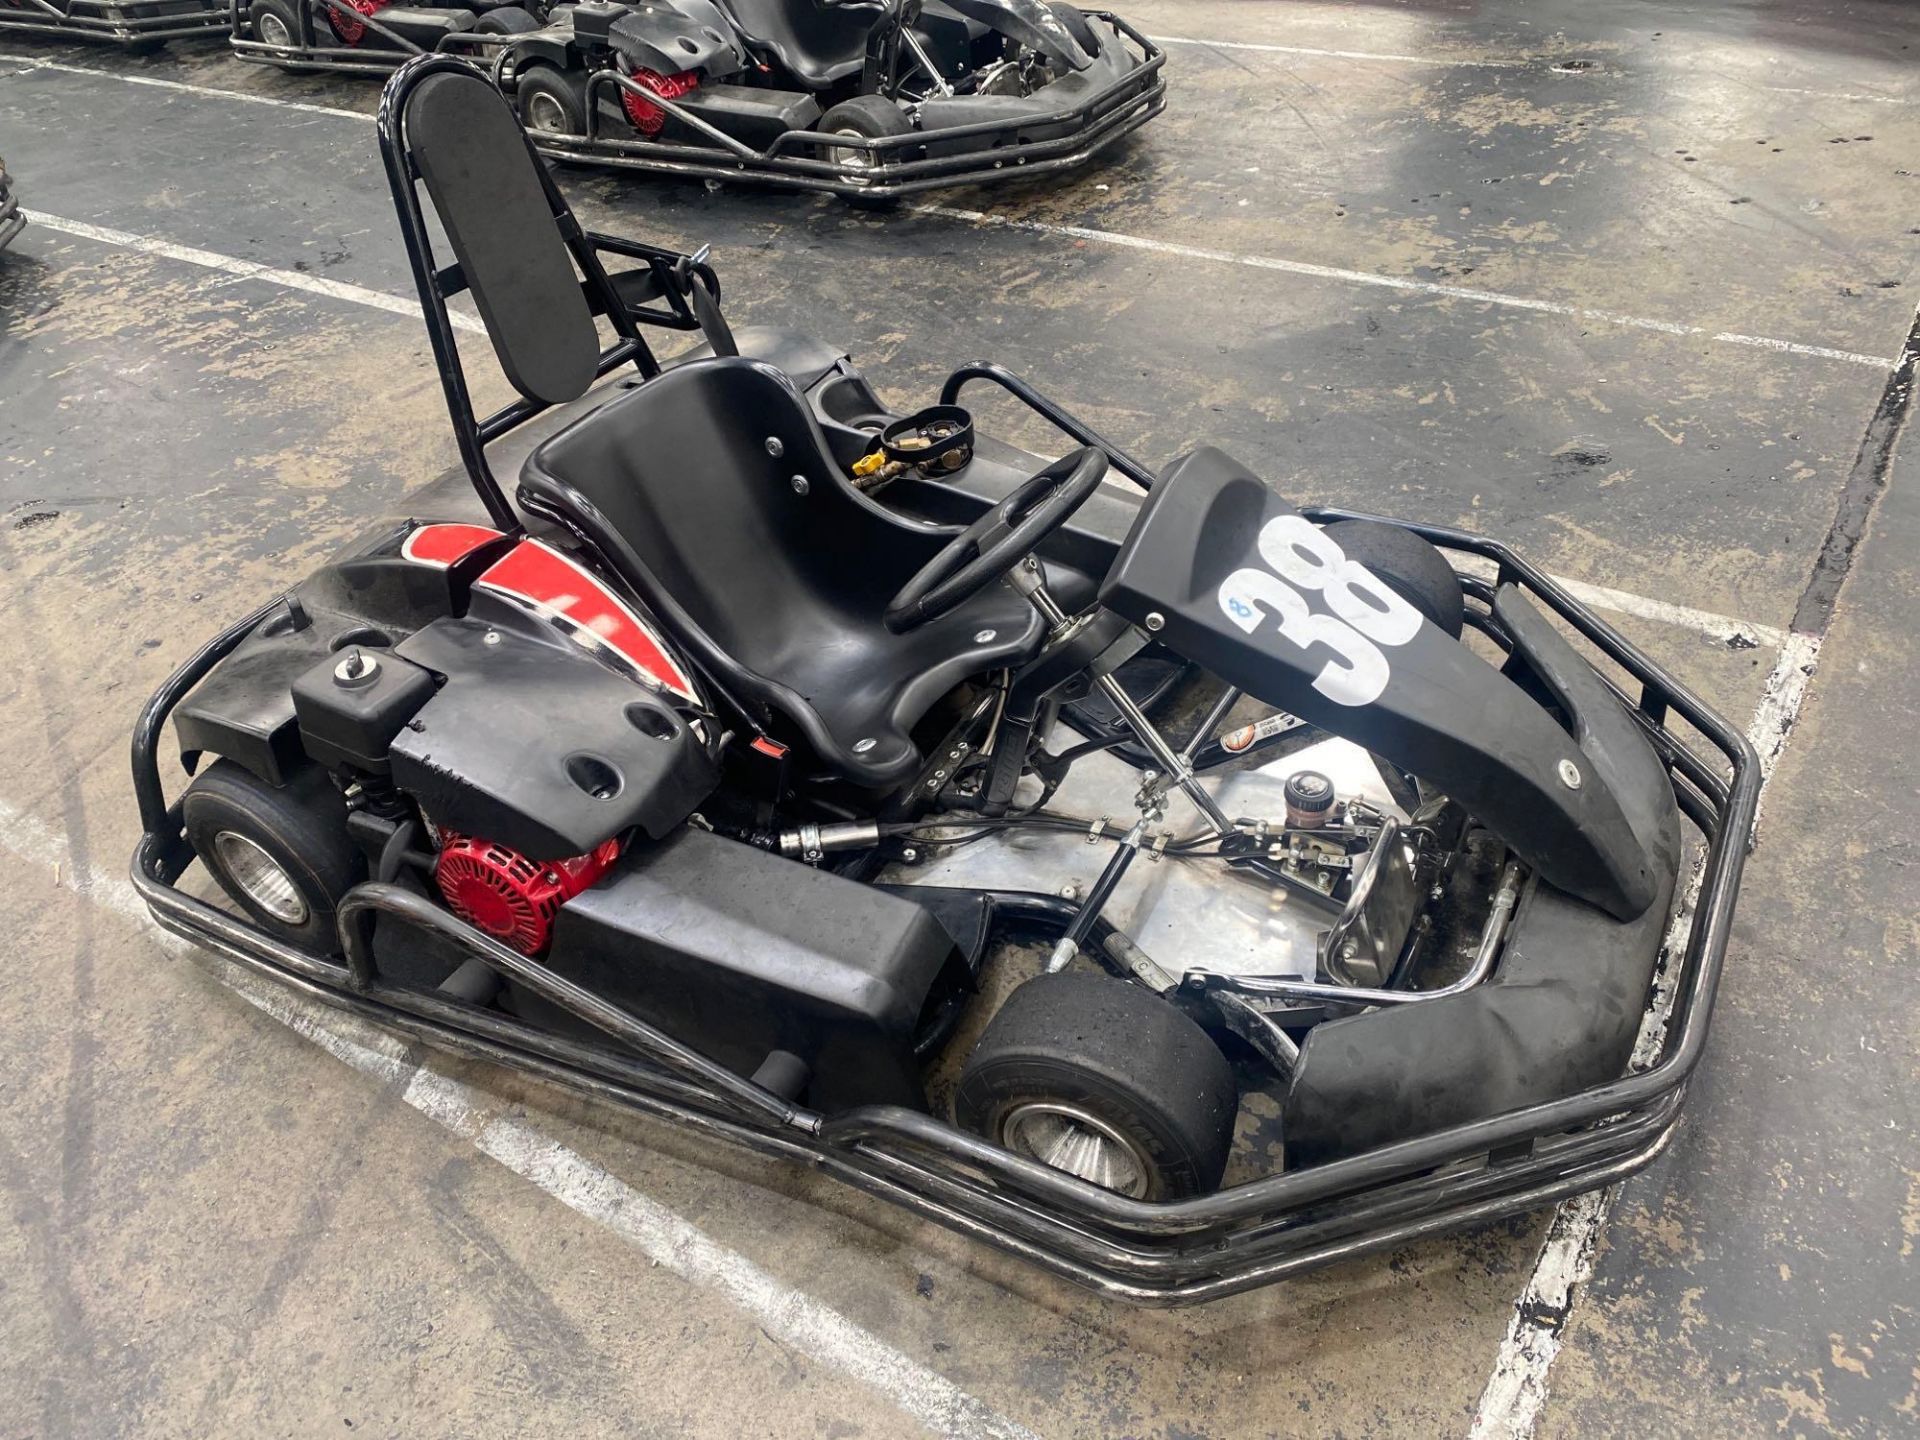 RIMO mini 160cc LPG fuelled kart complete with roll cage and seatbelt attachment kart 38 - Image 3 of 5